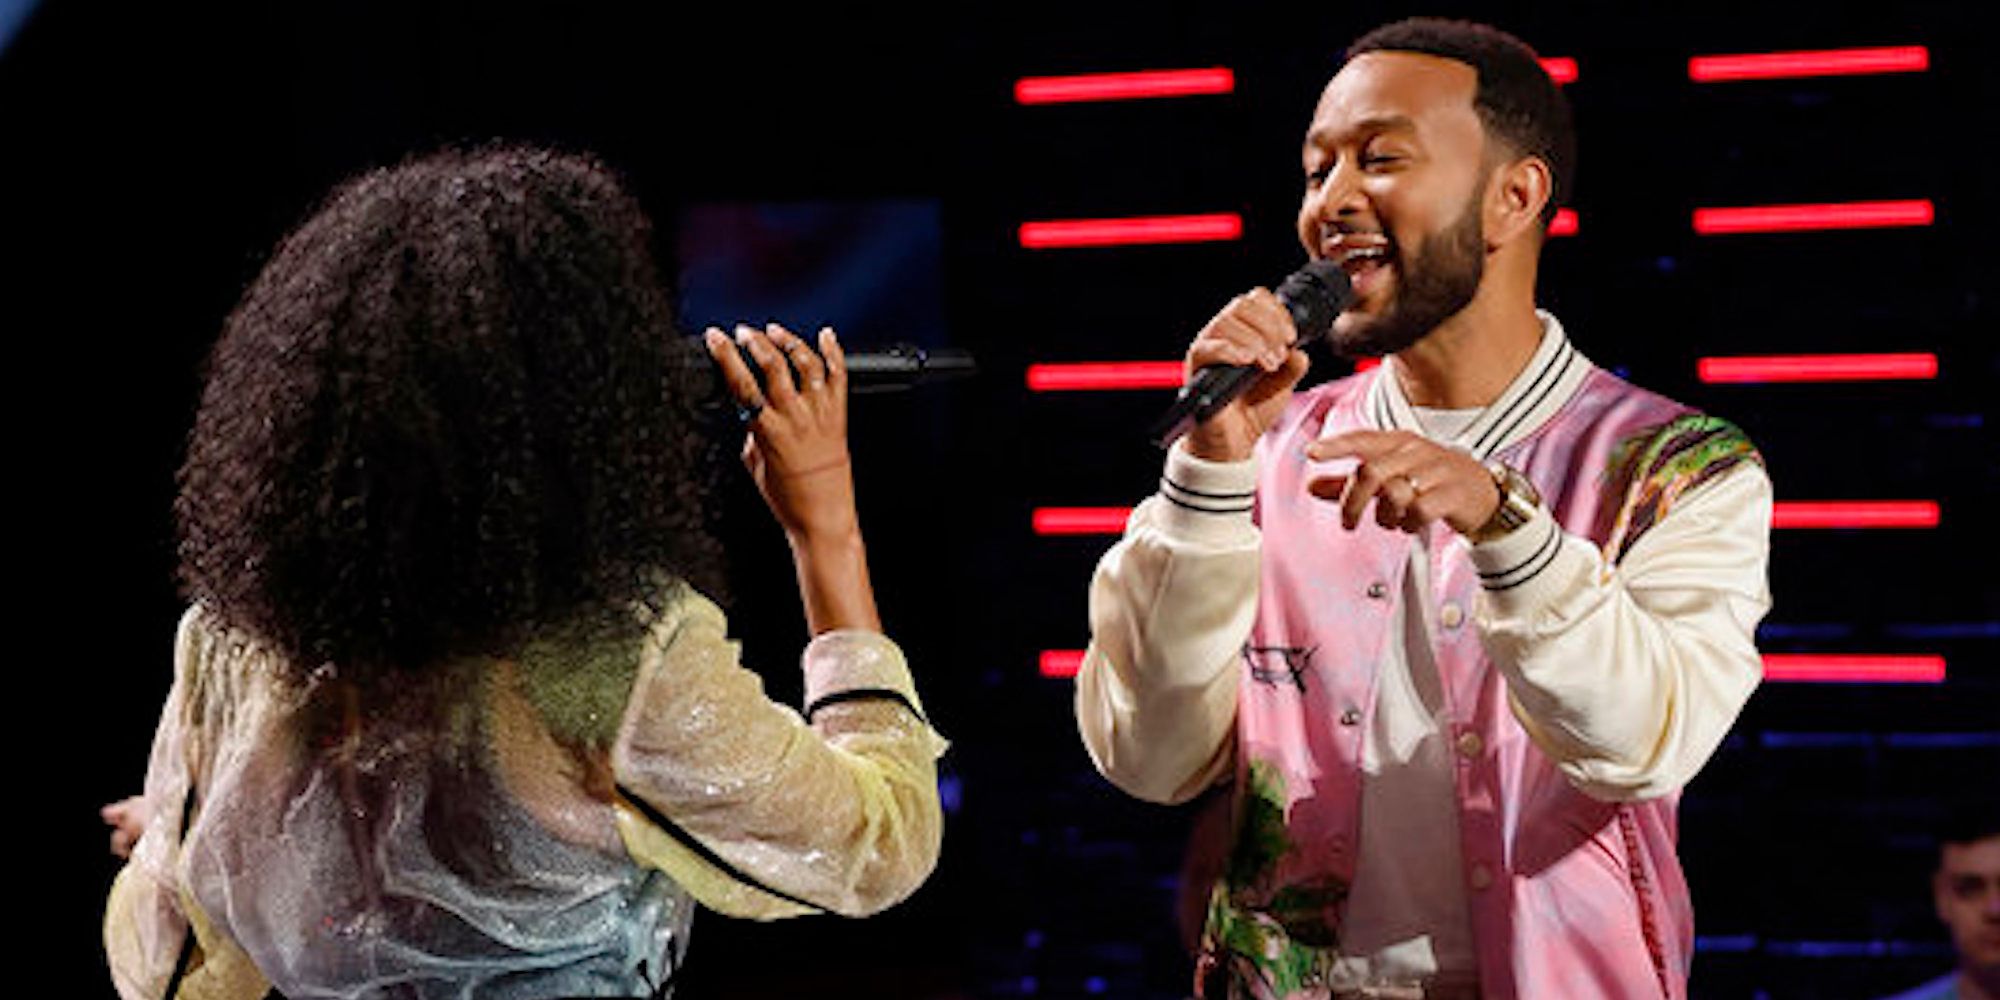 John Legend attempts to sway vocalist Nadège's choice by singing a duet with her on stage at 'The Voice'